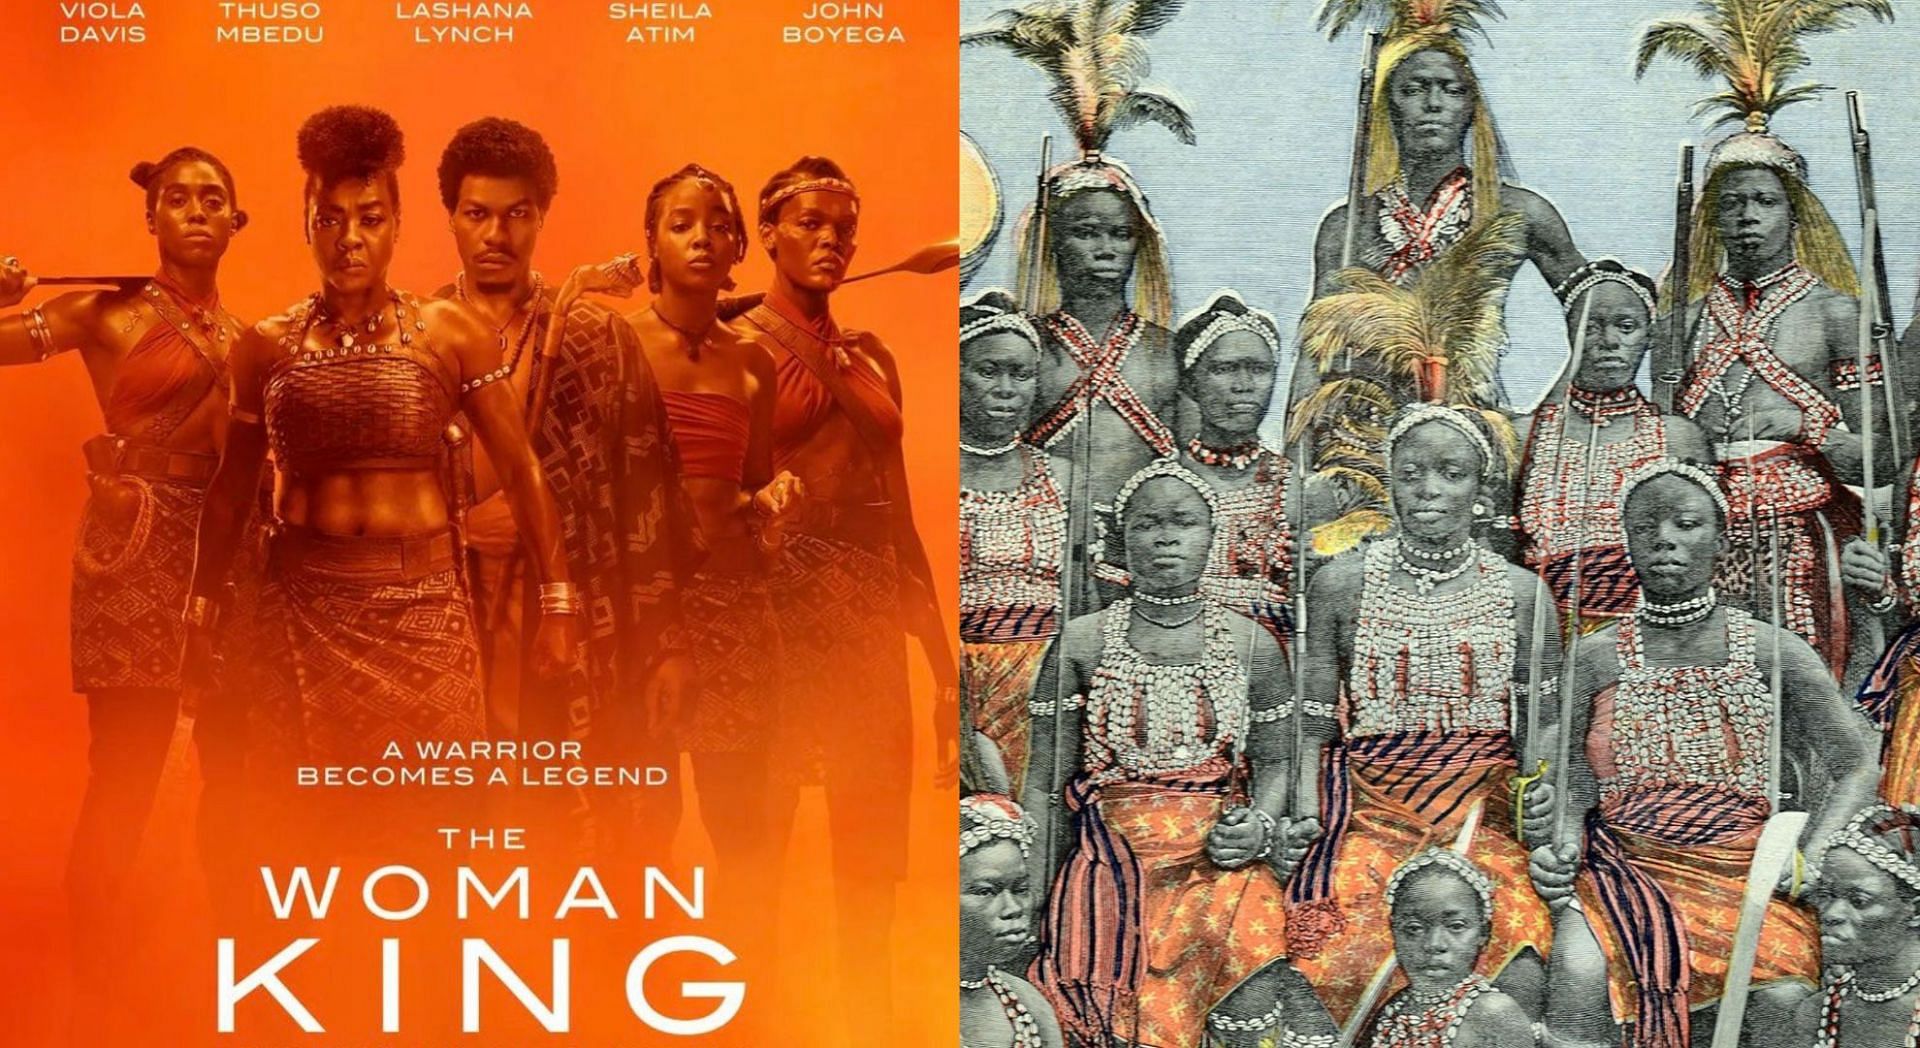 The Woman King: The truth about slavery matters, Arts and Culture